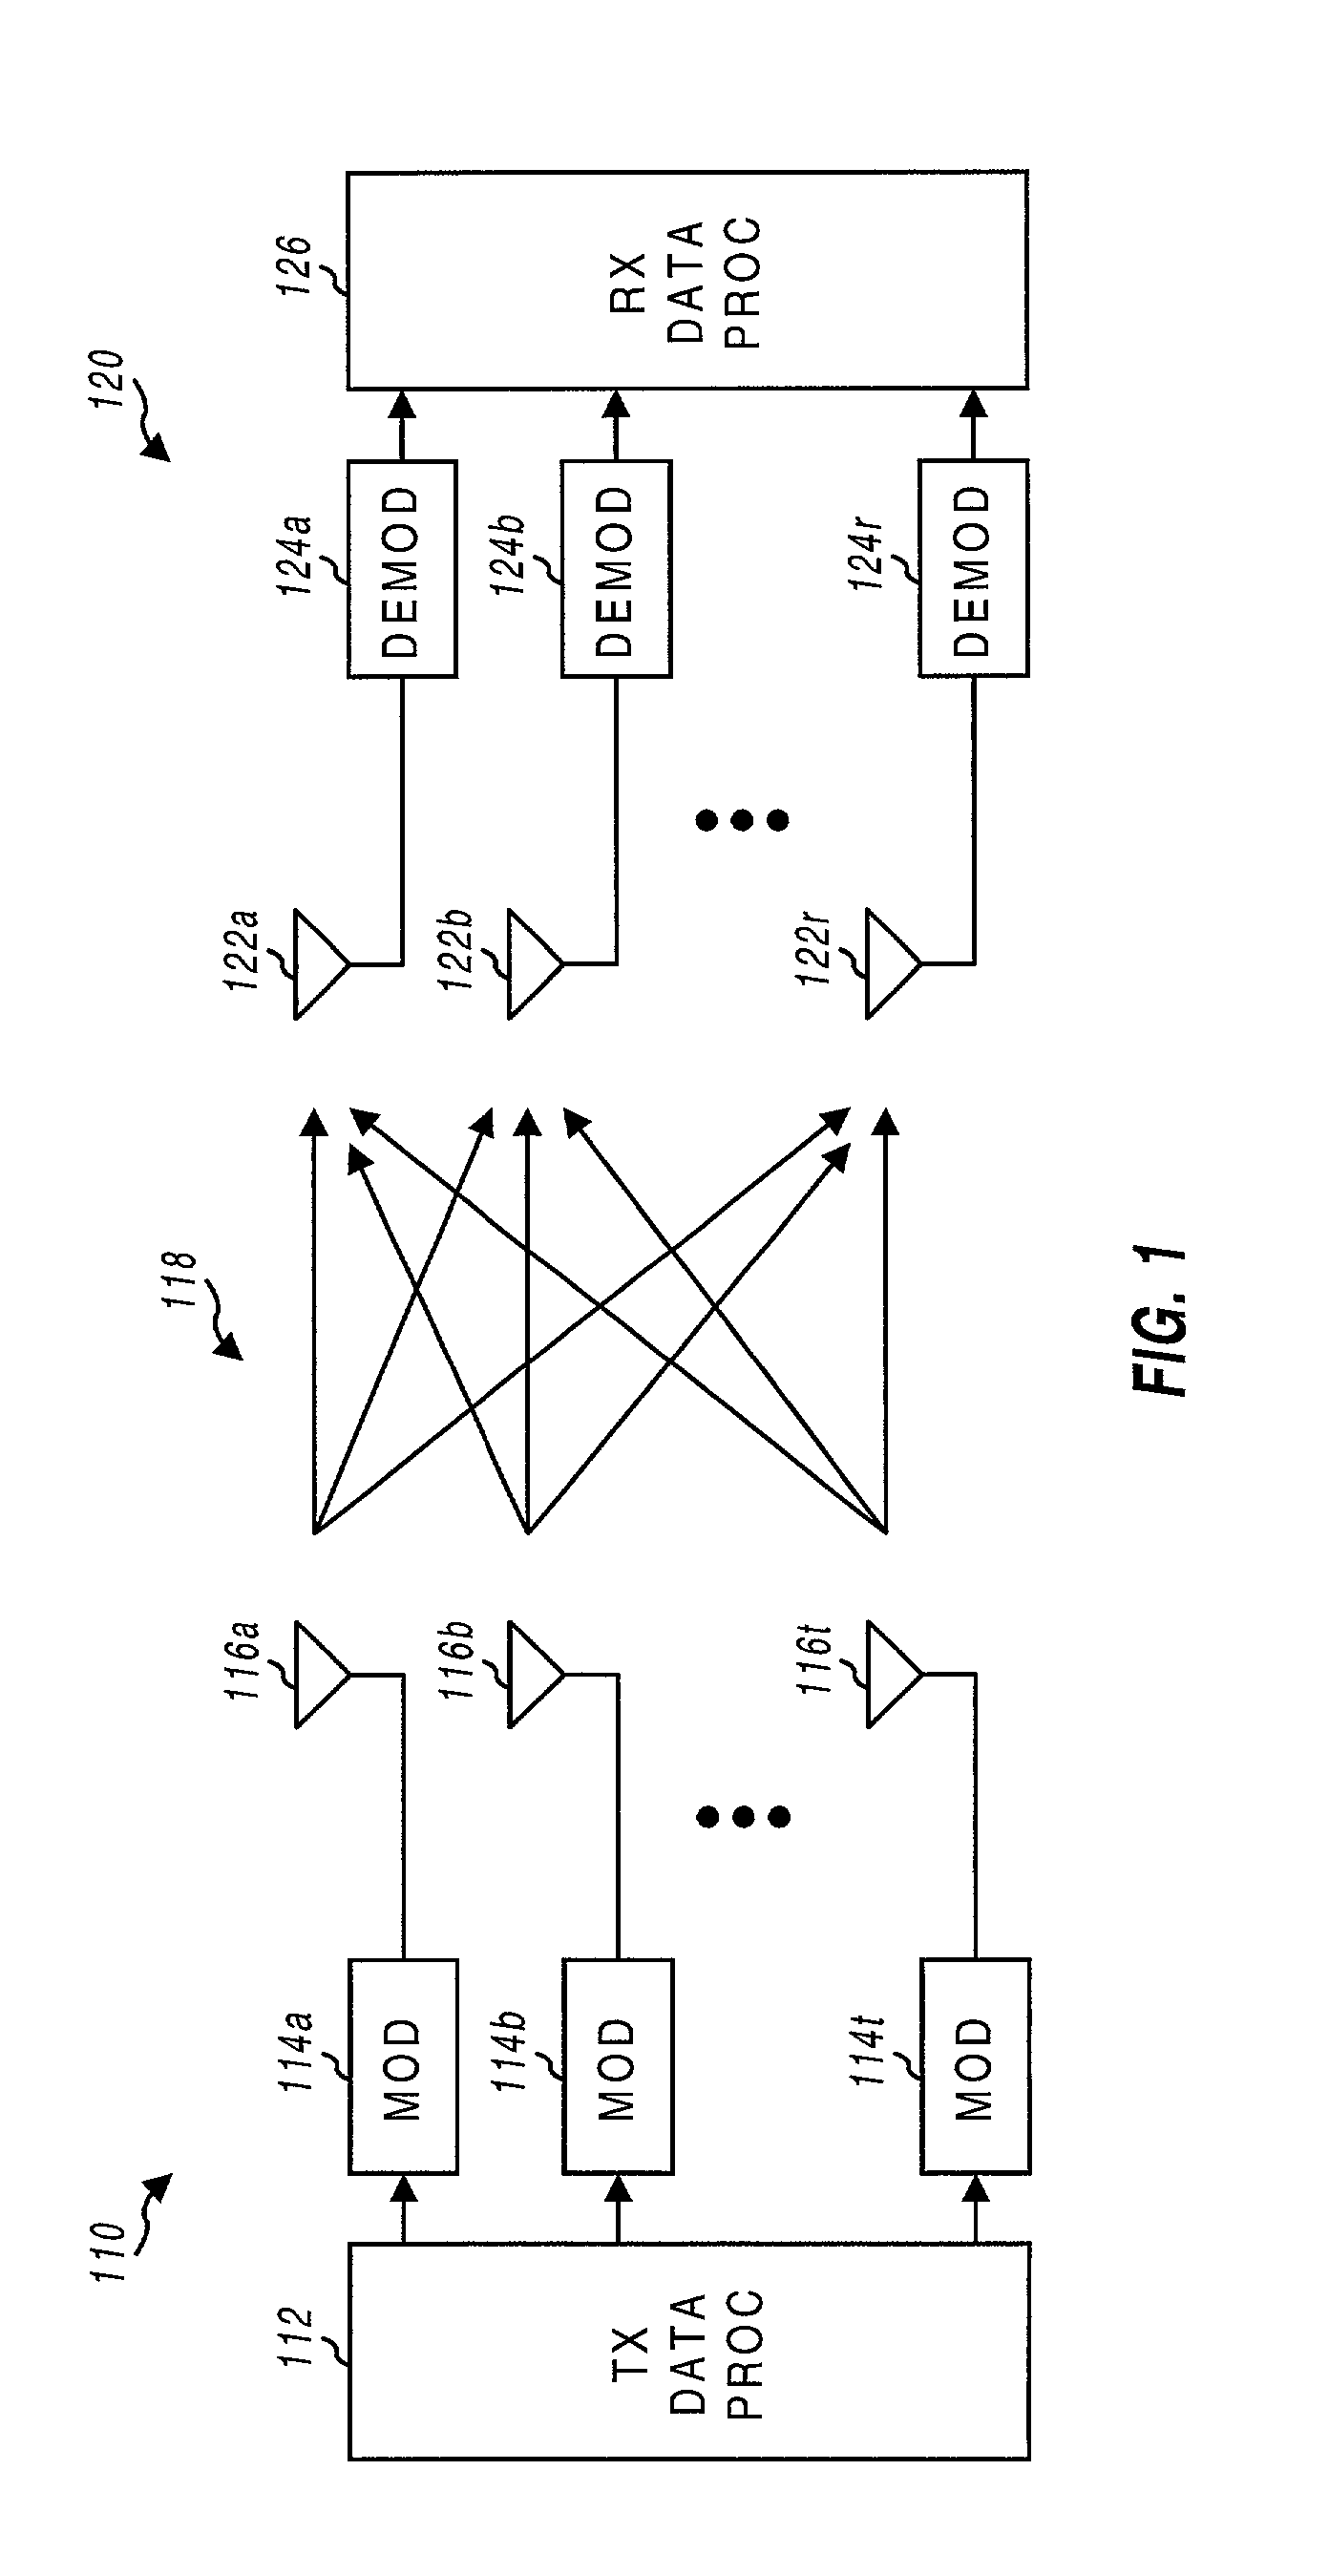 High efficiency high performance communications system employing multi-carrier modulation